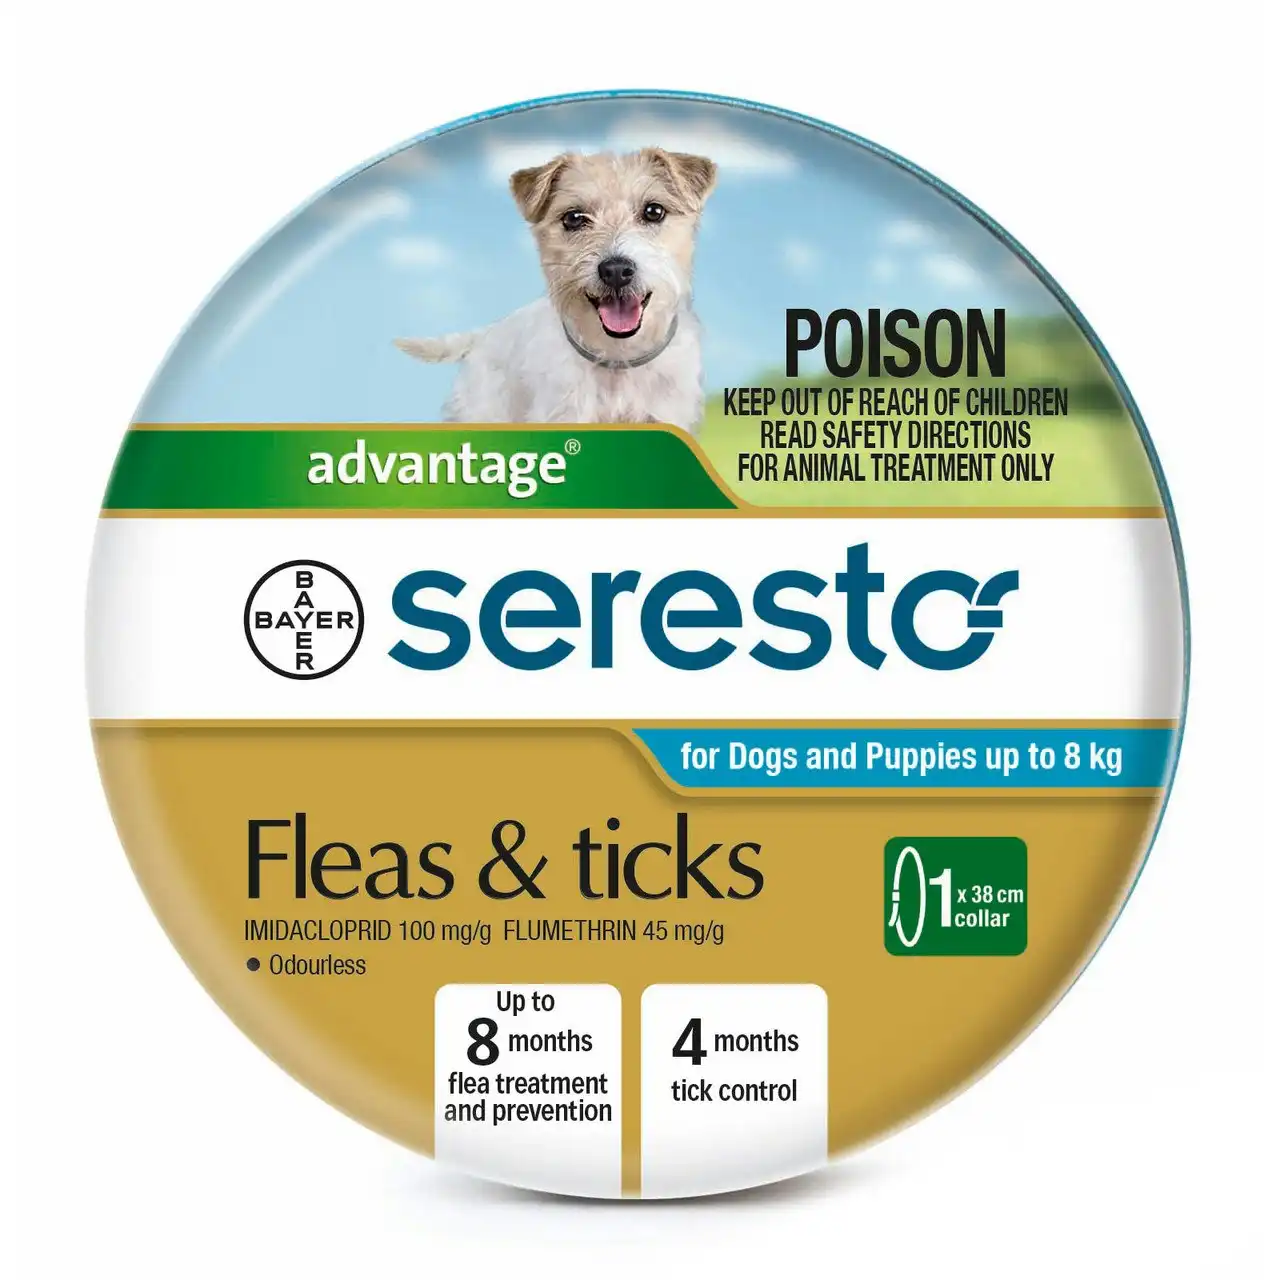 Seresto(TM) Flea & Tick Collar for Dogs And Puppies Up To 8kg - 1 Pack